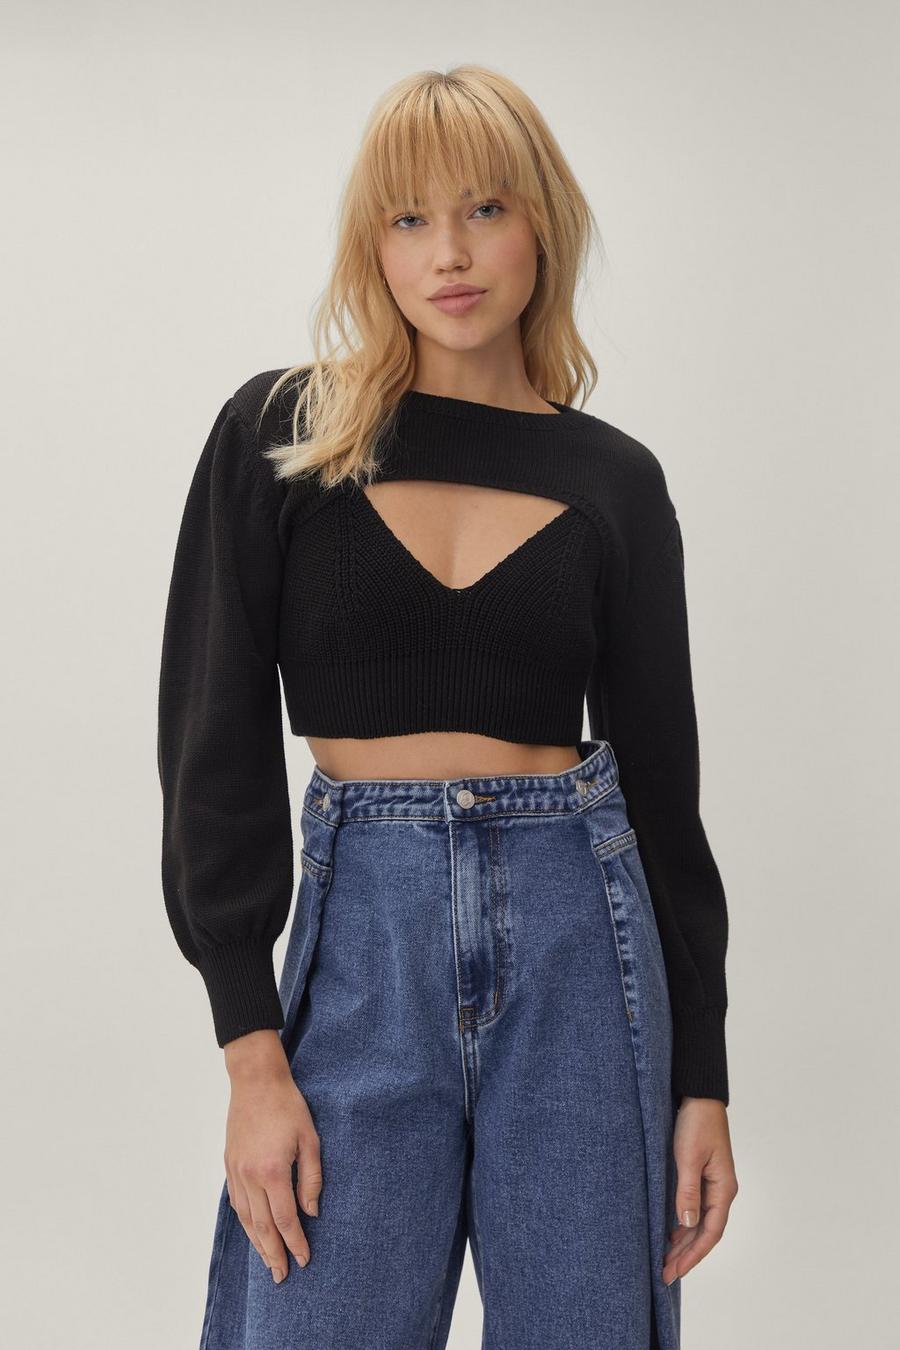 Longline Bralette and Super Cropped Sweater Set